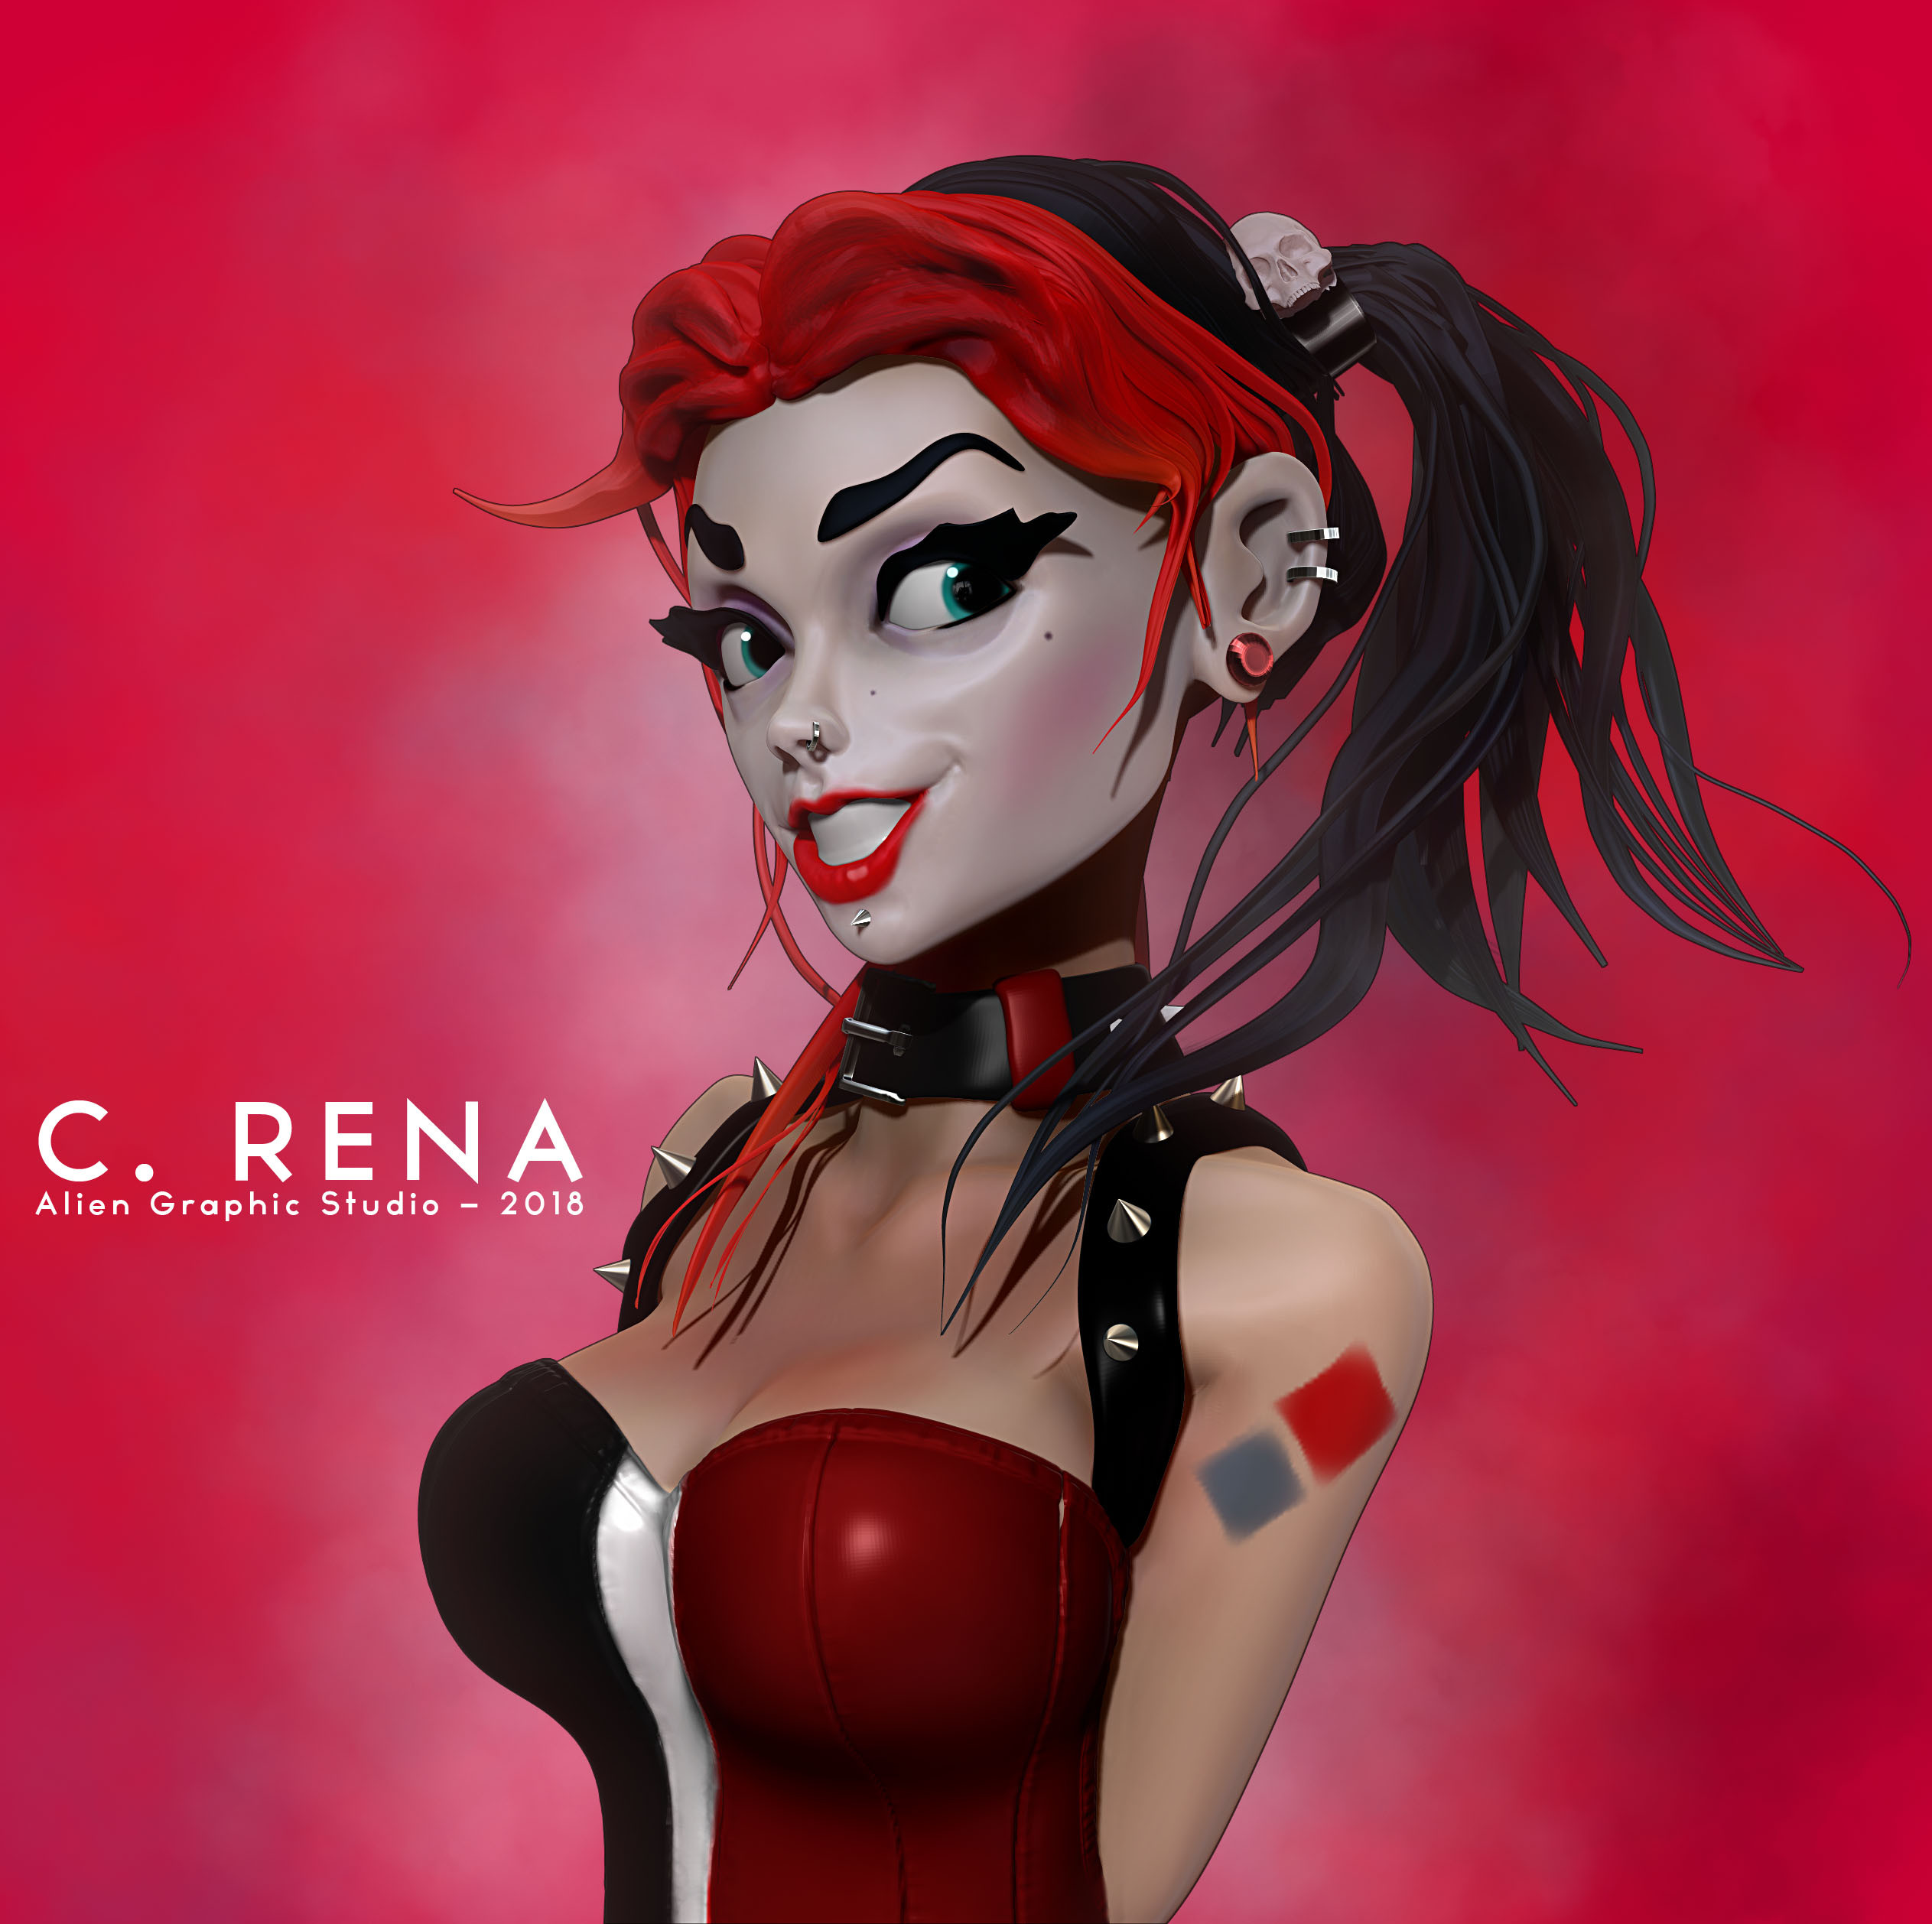 Harley Quinn stylized character render"1